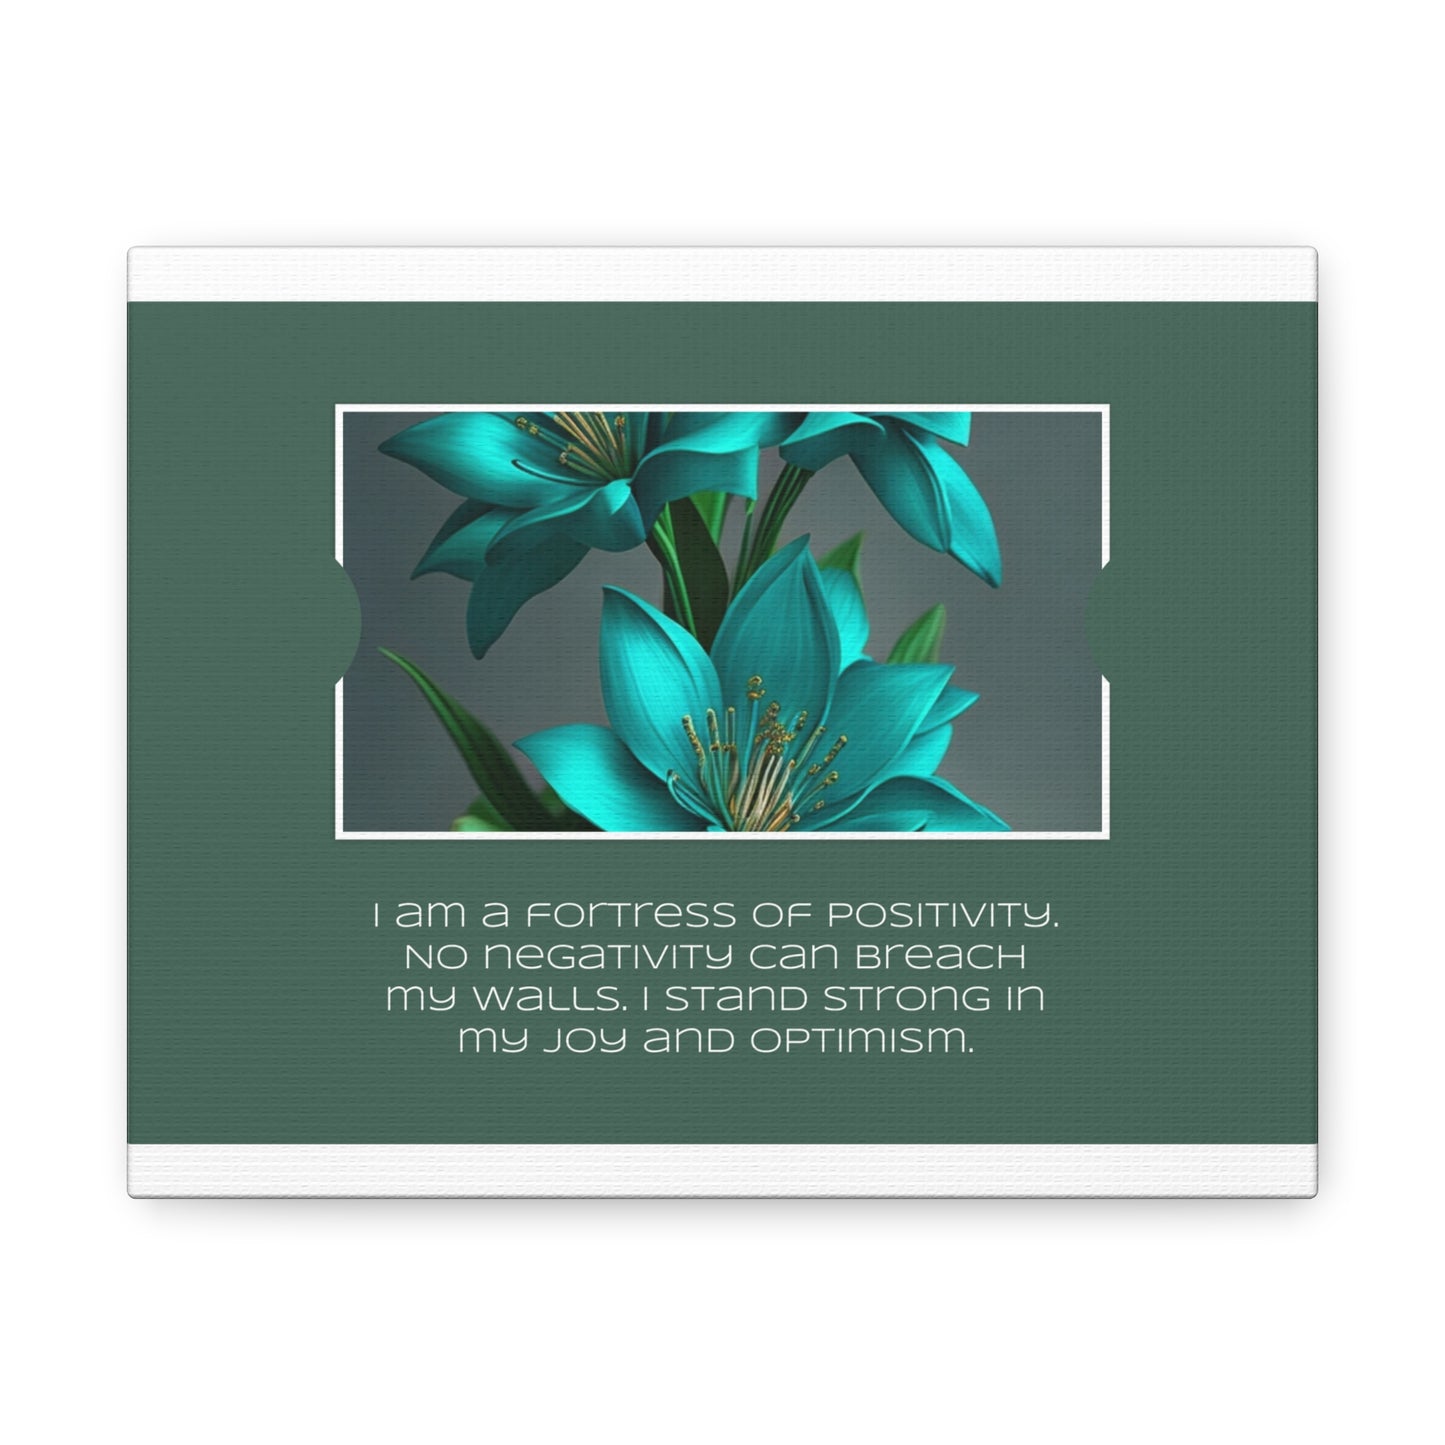 Fortress of Positivity - Affirmation Wall Art